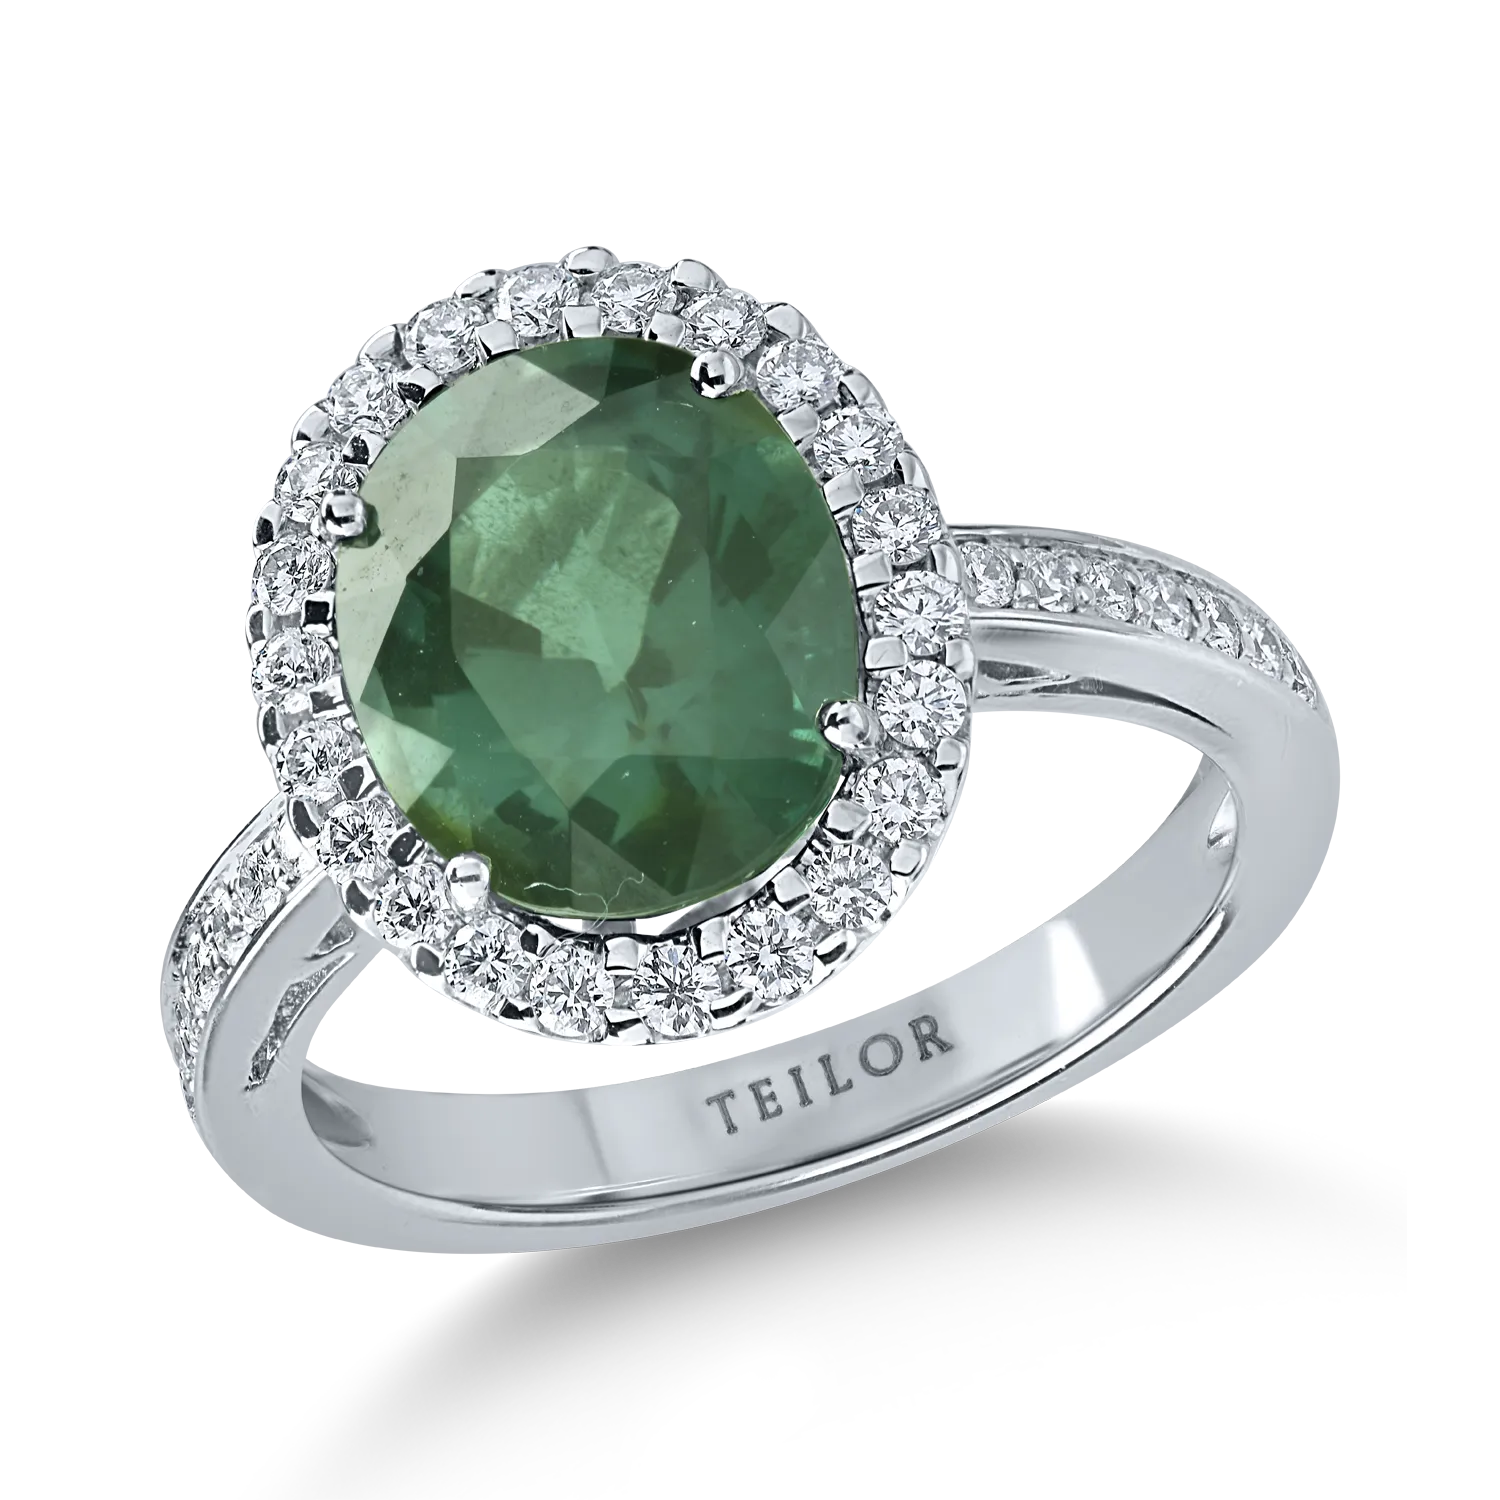 White gold ring with 3.1ct green tourmaline and 0.4ct diamonds